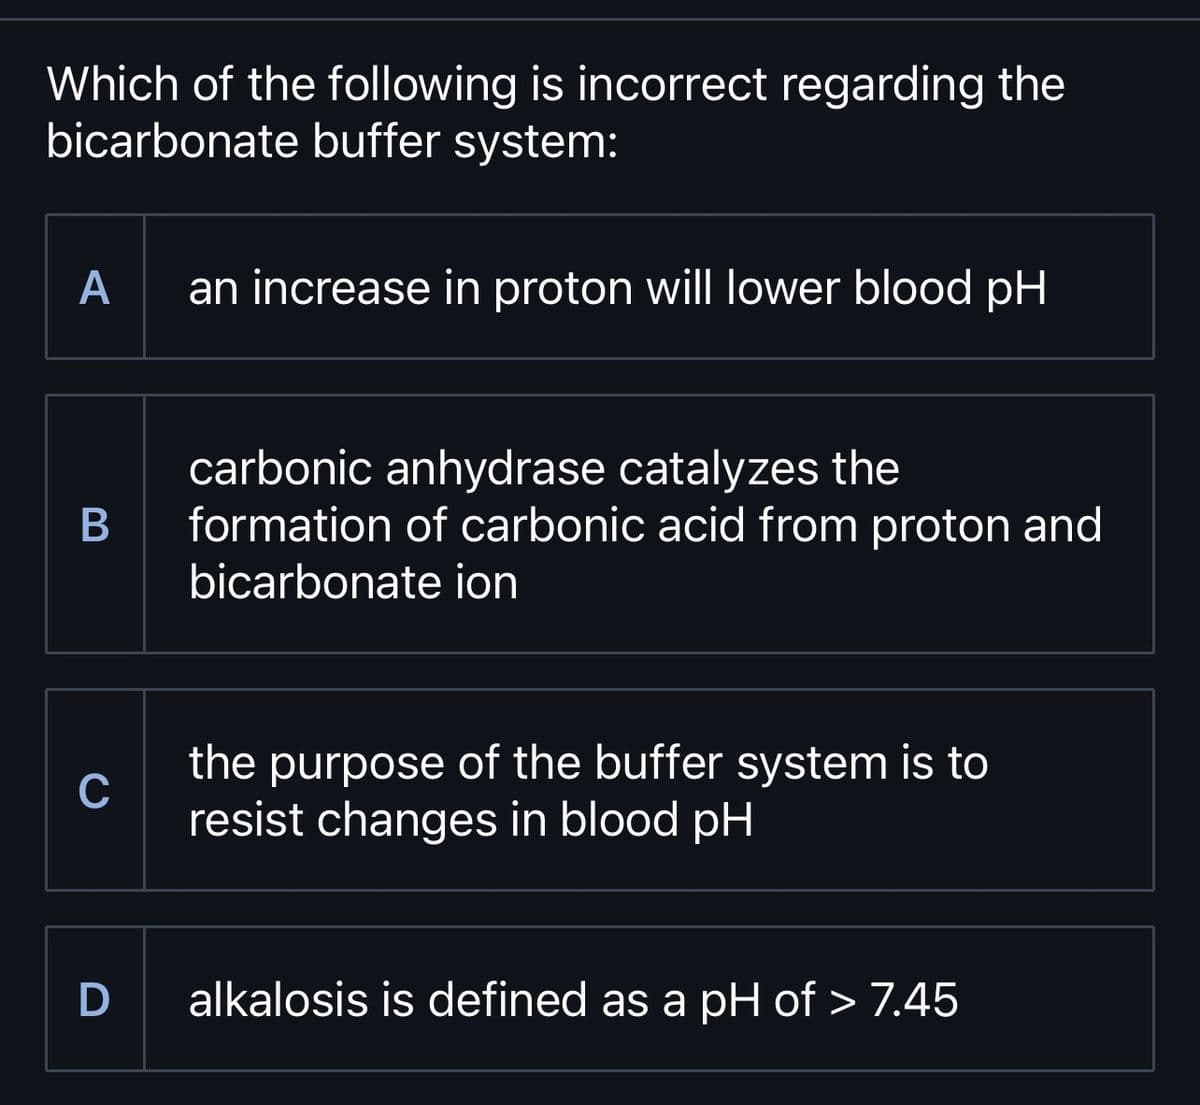 Which of the following is incorrect regarding the
bicarbonate buffer system:
A
B
C
D
an increase in proton will lower blood pH
carbonic anhydrase catalyzes the
formation of carbonic acid from proton and
bicarbonate ion
the purpose of the buffer system is to
resist changes in blood pH
alkalosis is defined as a pH of > 7.45